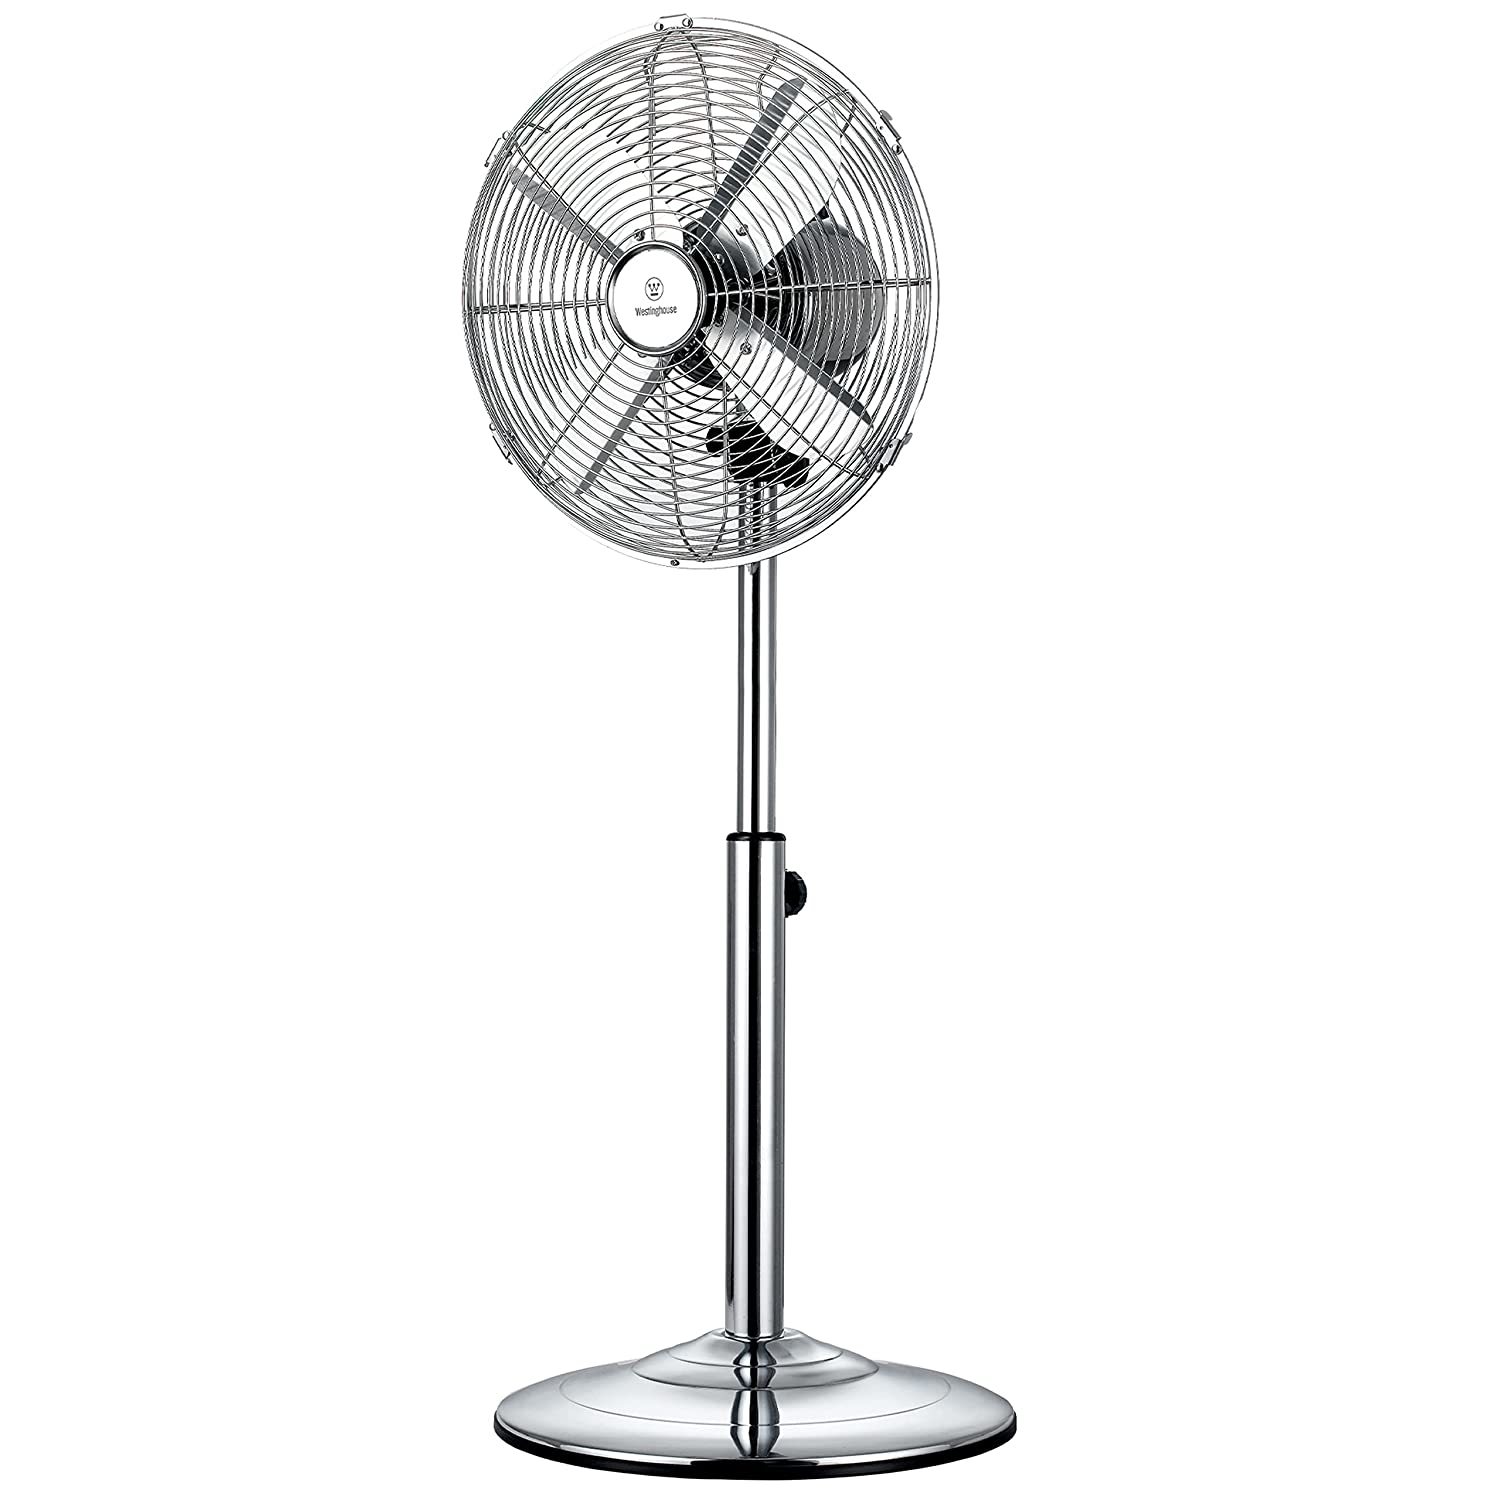 Primary image for Westinghouse Vintage Metal Pedestal Fan - 16 Stand Fan Made with 3-Speed Setting